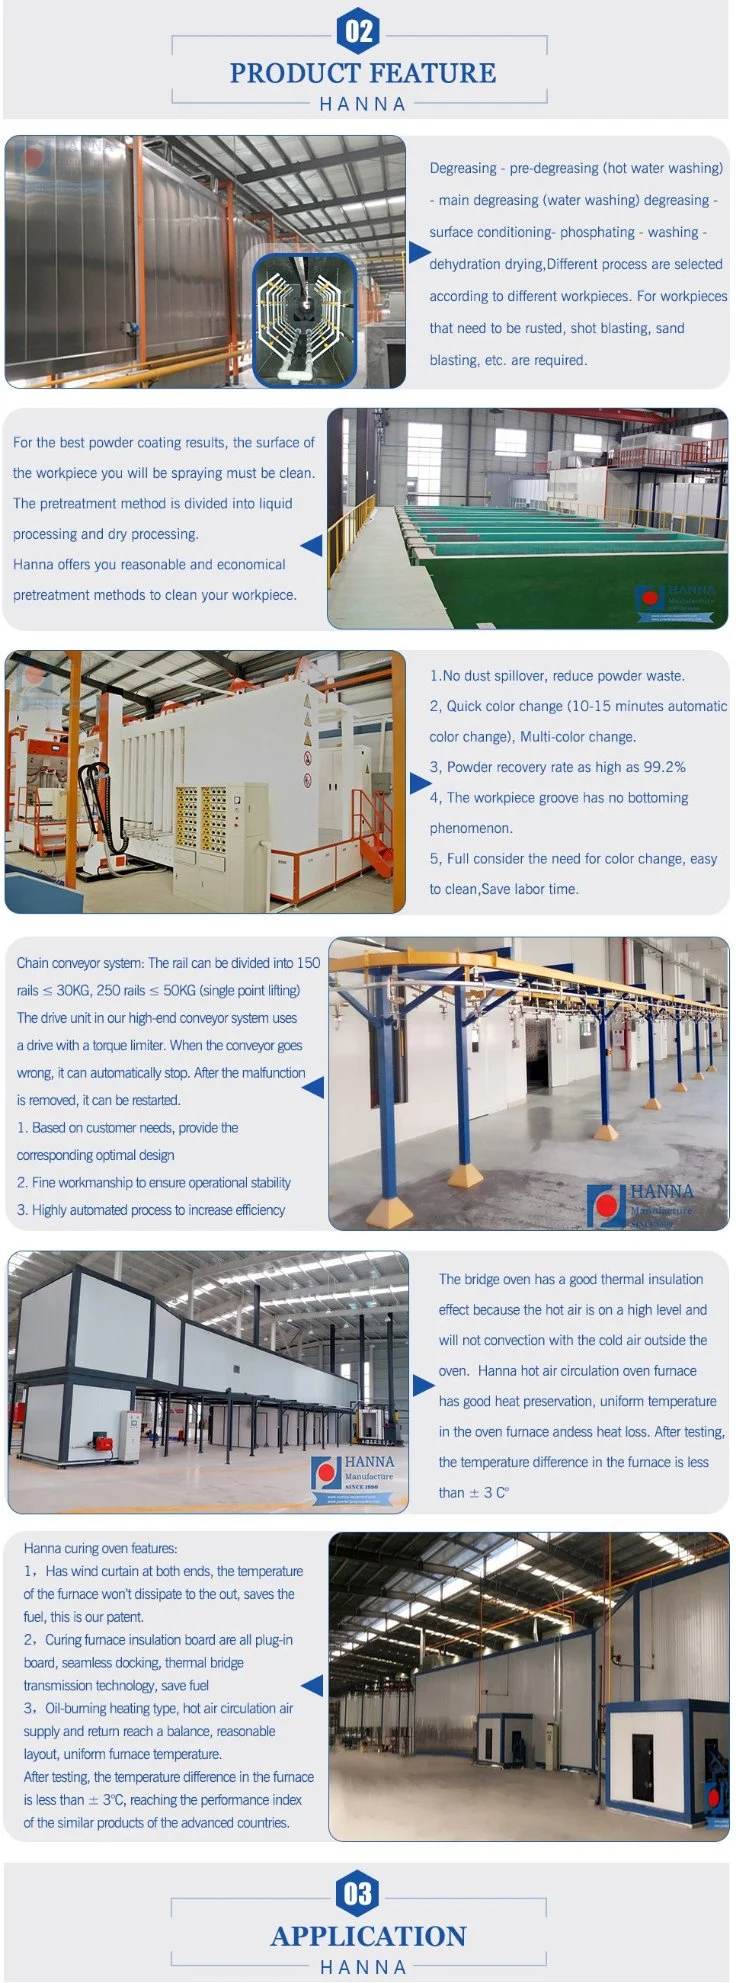 Quality Powder Coating Lines for Protective Net Spraying